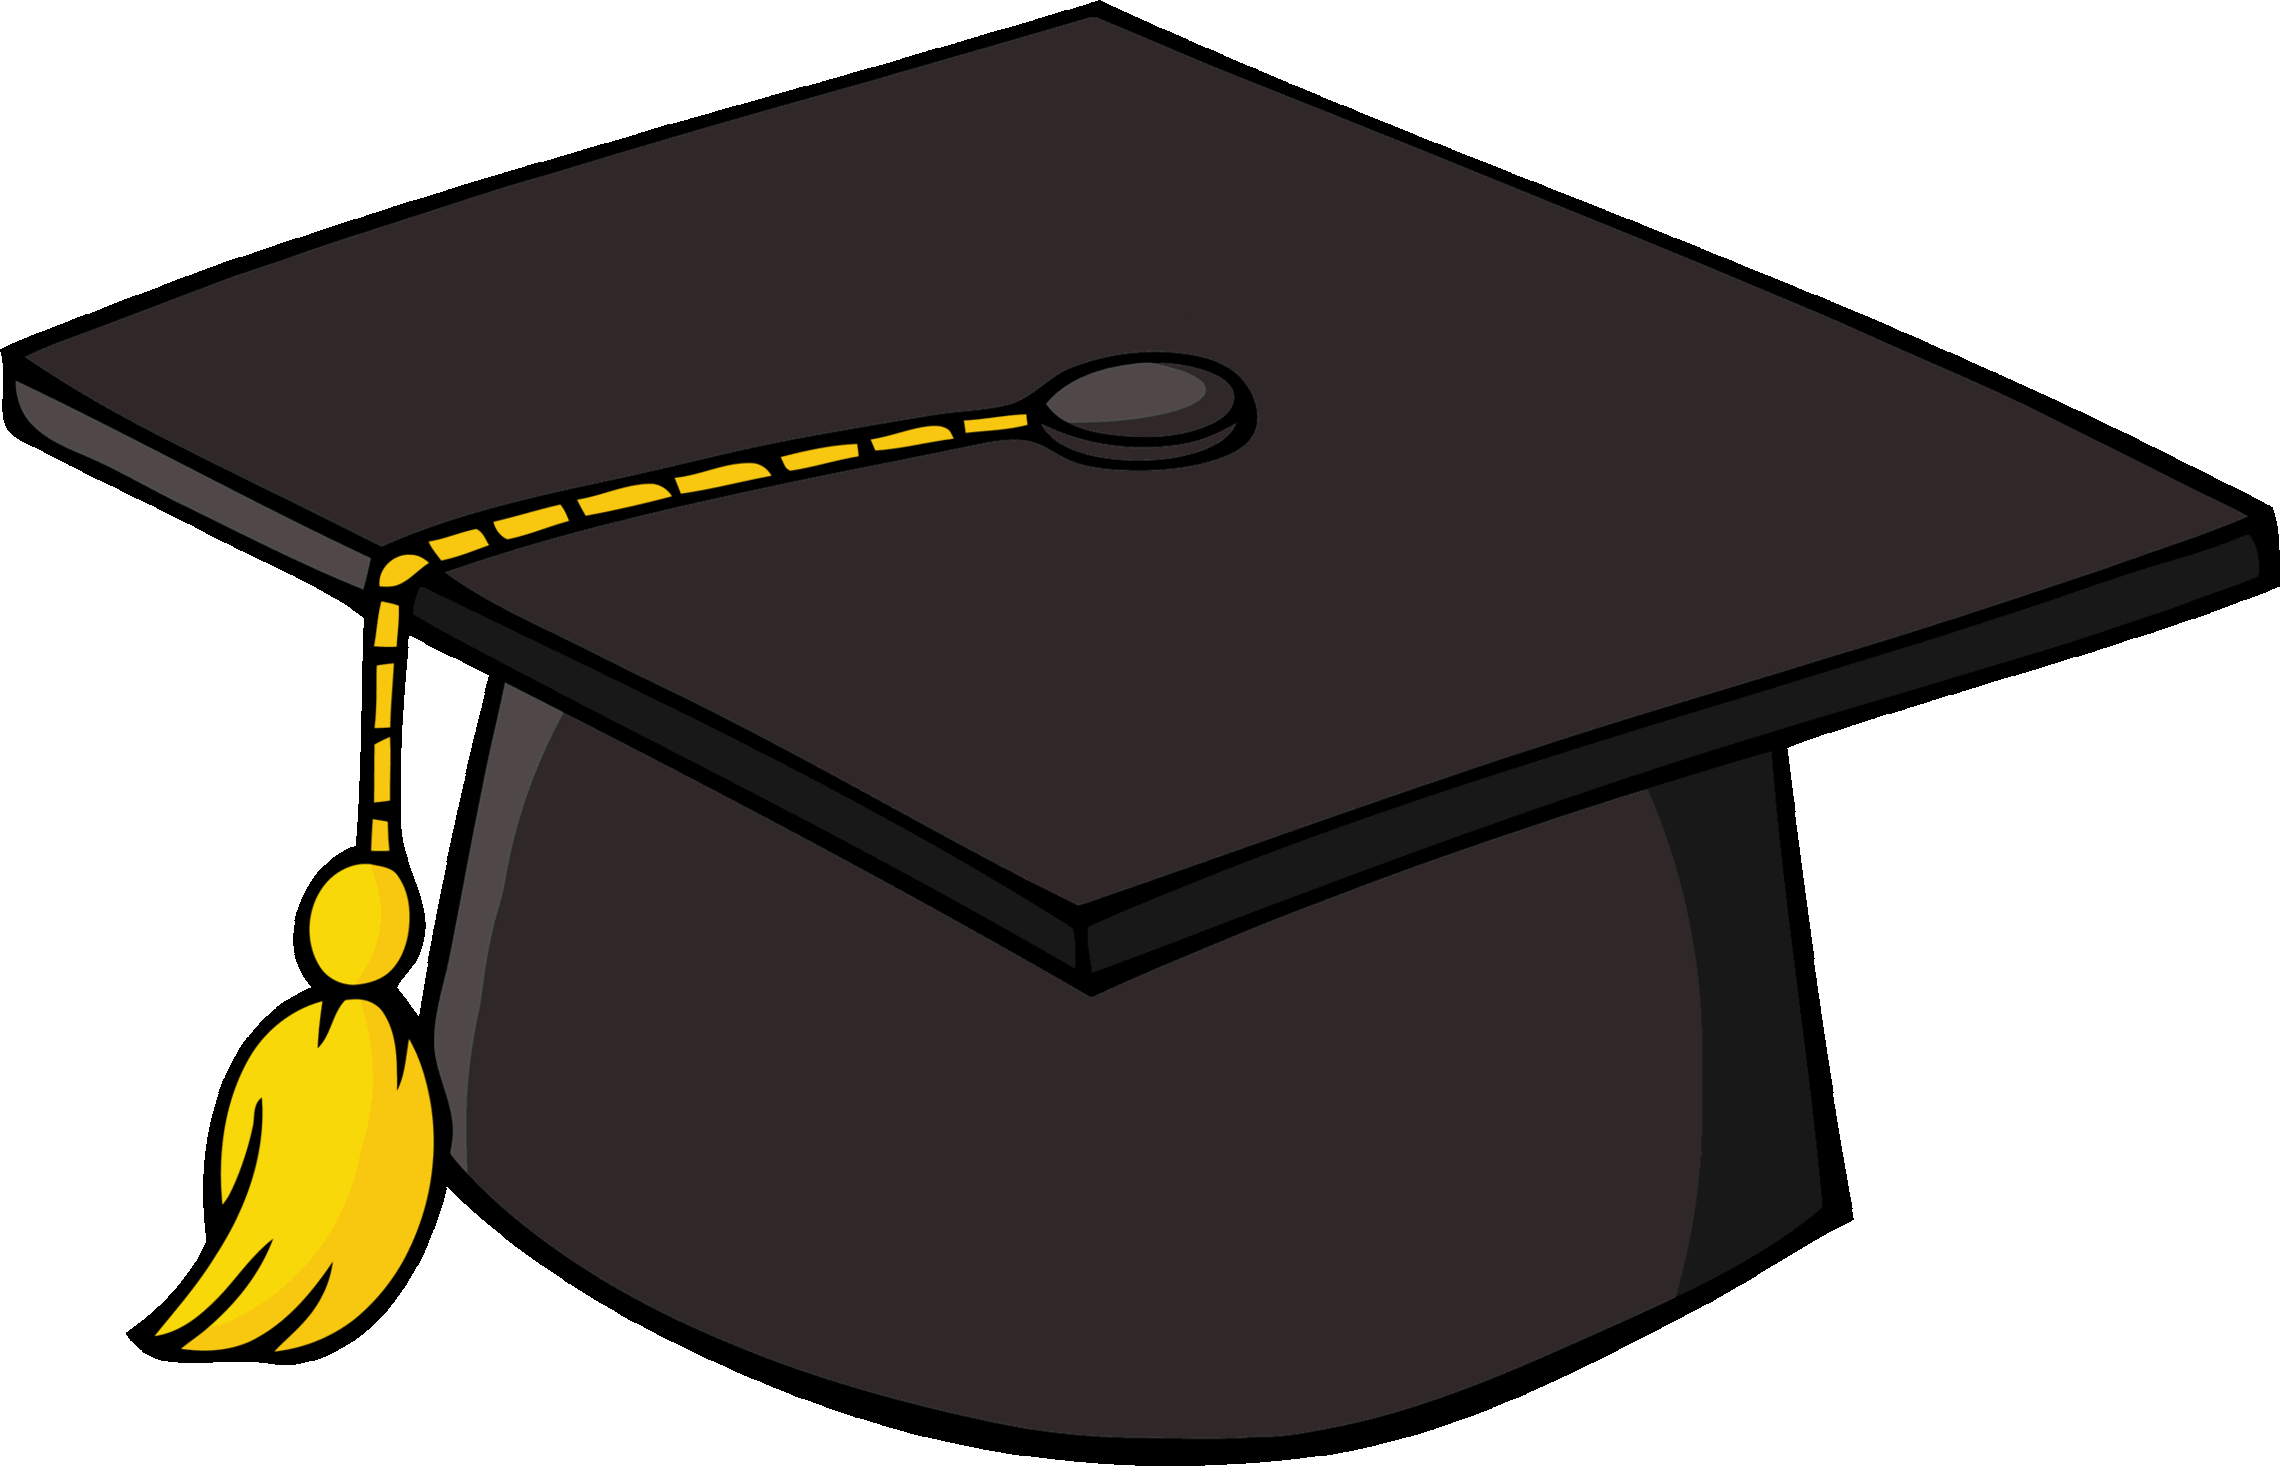 Free Graduation Cap Clipart Transparent, Download Free Graduation Cap Clipart Transparent png image, Free ClipArts on Clipart Library